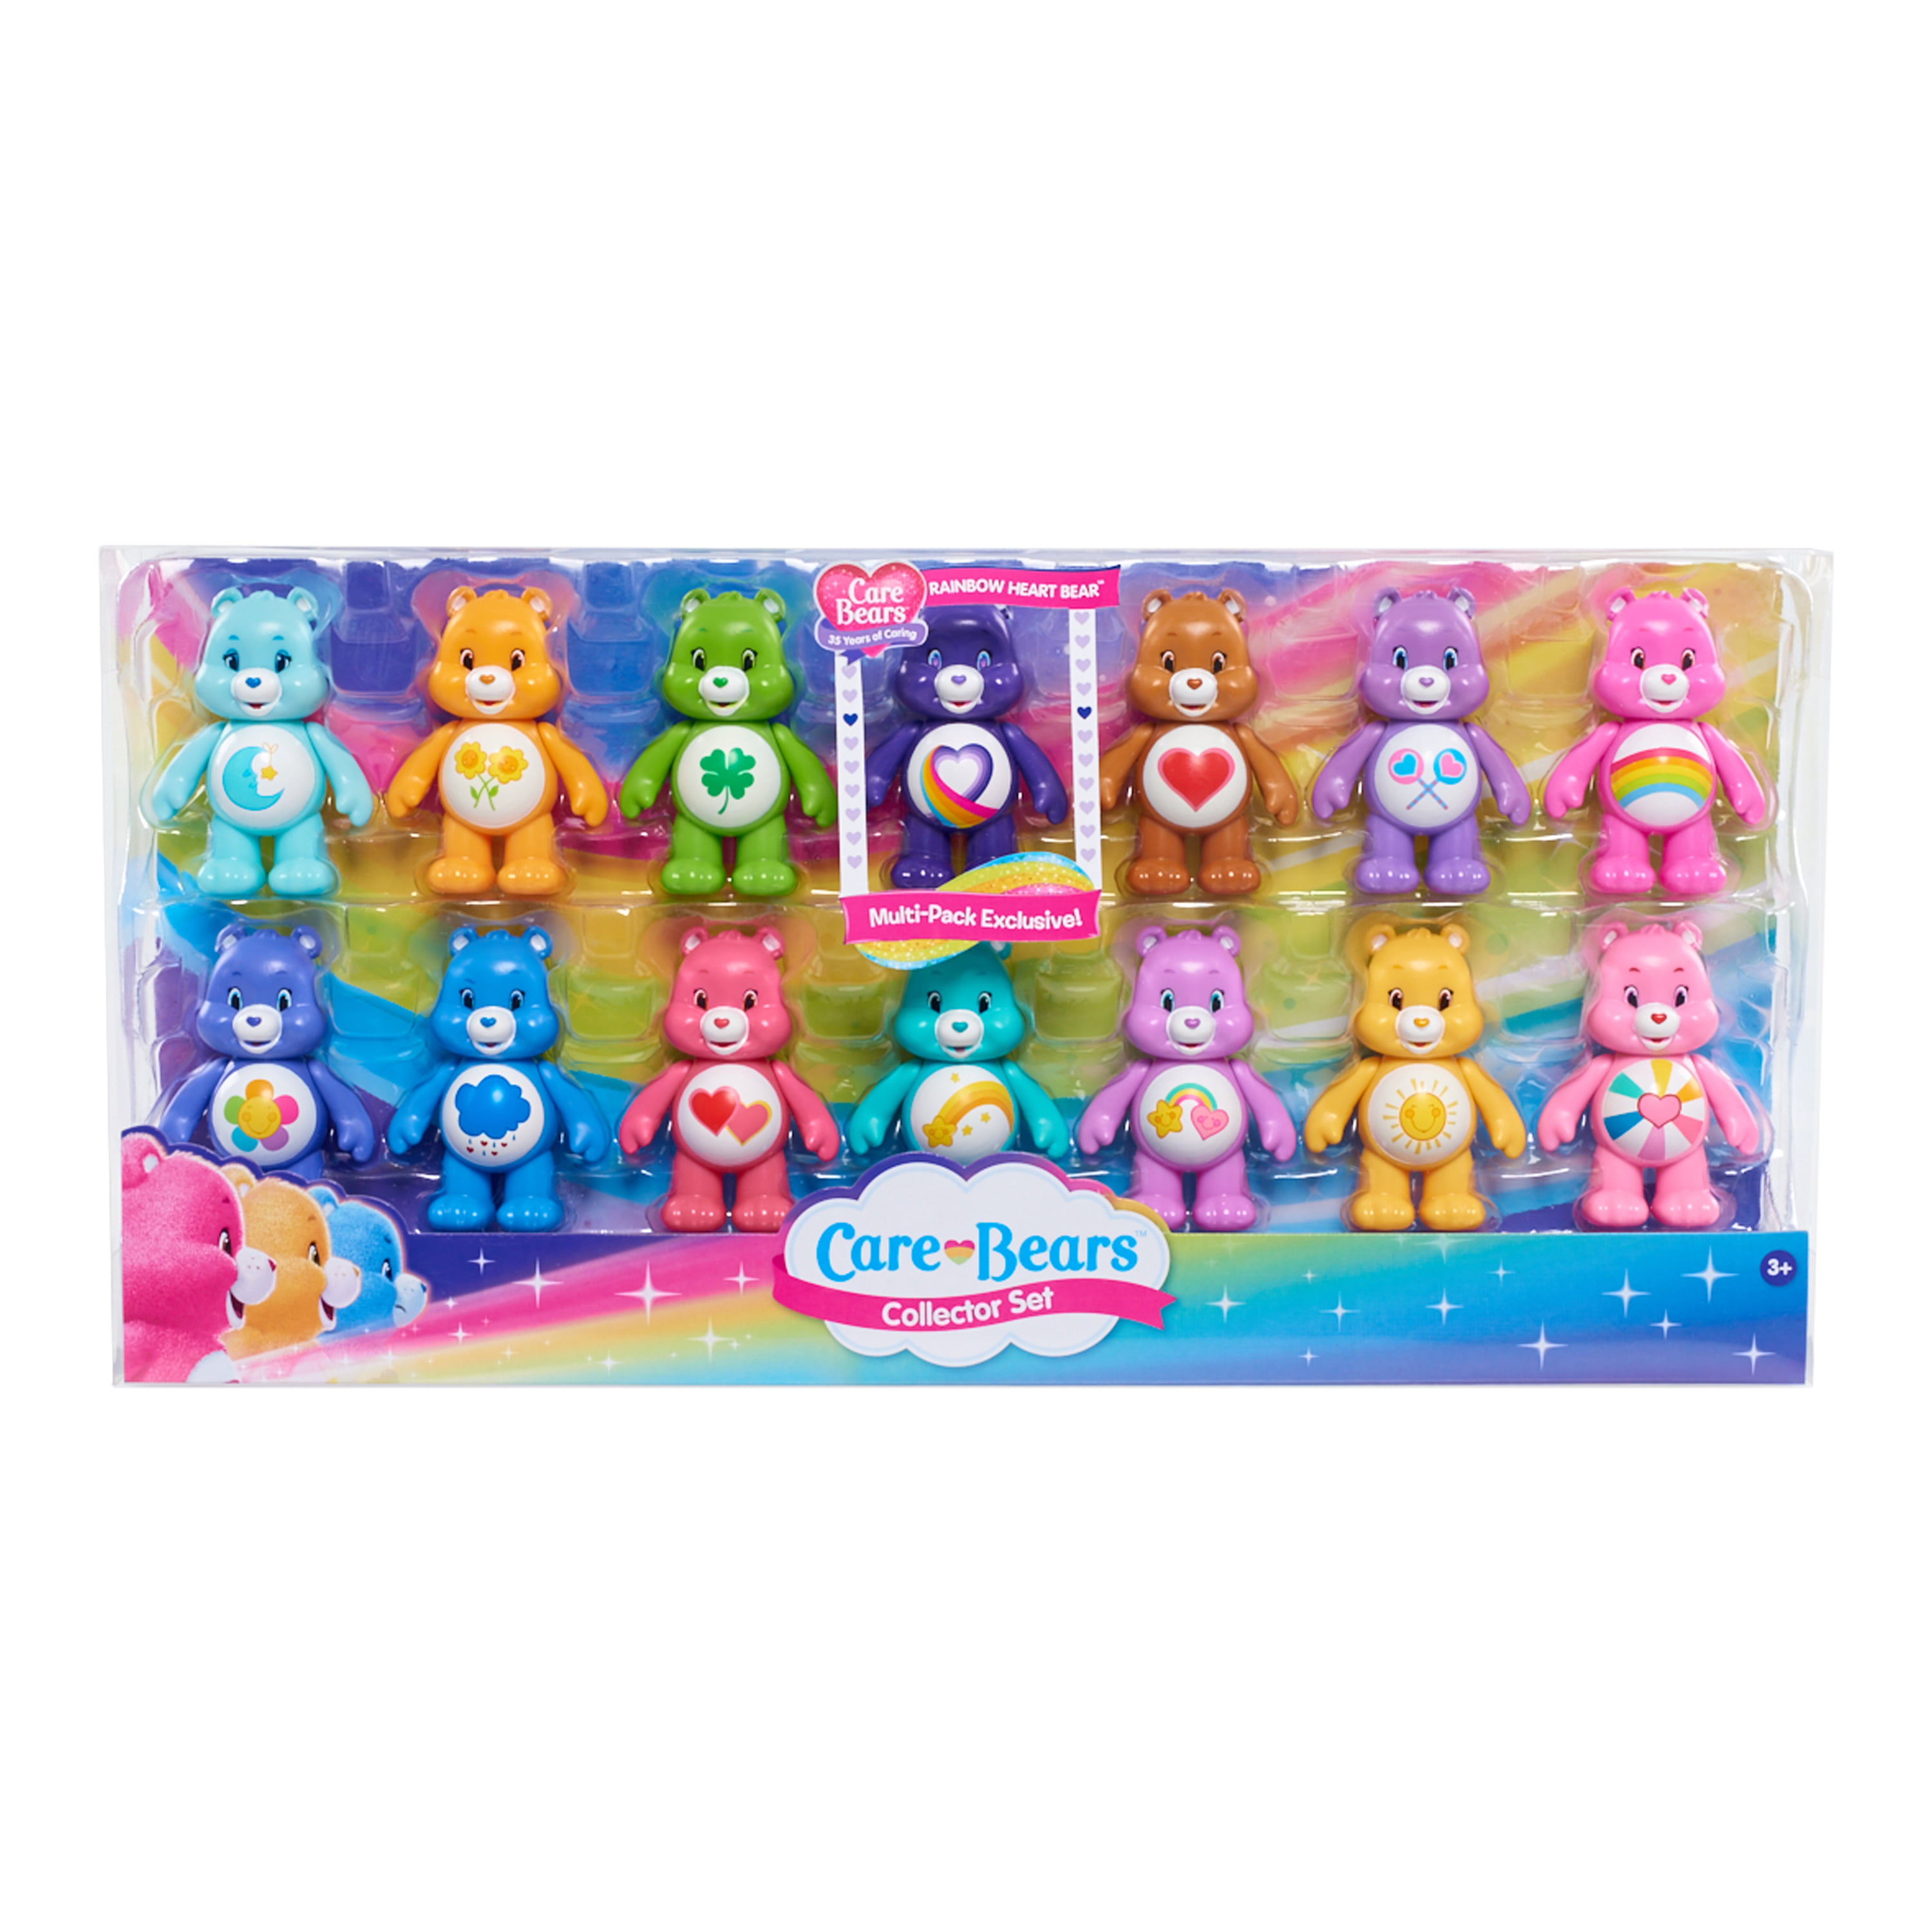 2020 Care Bears Mini 3 inch Figures articulated arms 5 pack *NEW* Just Play Toys 